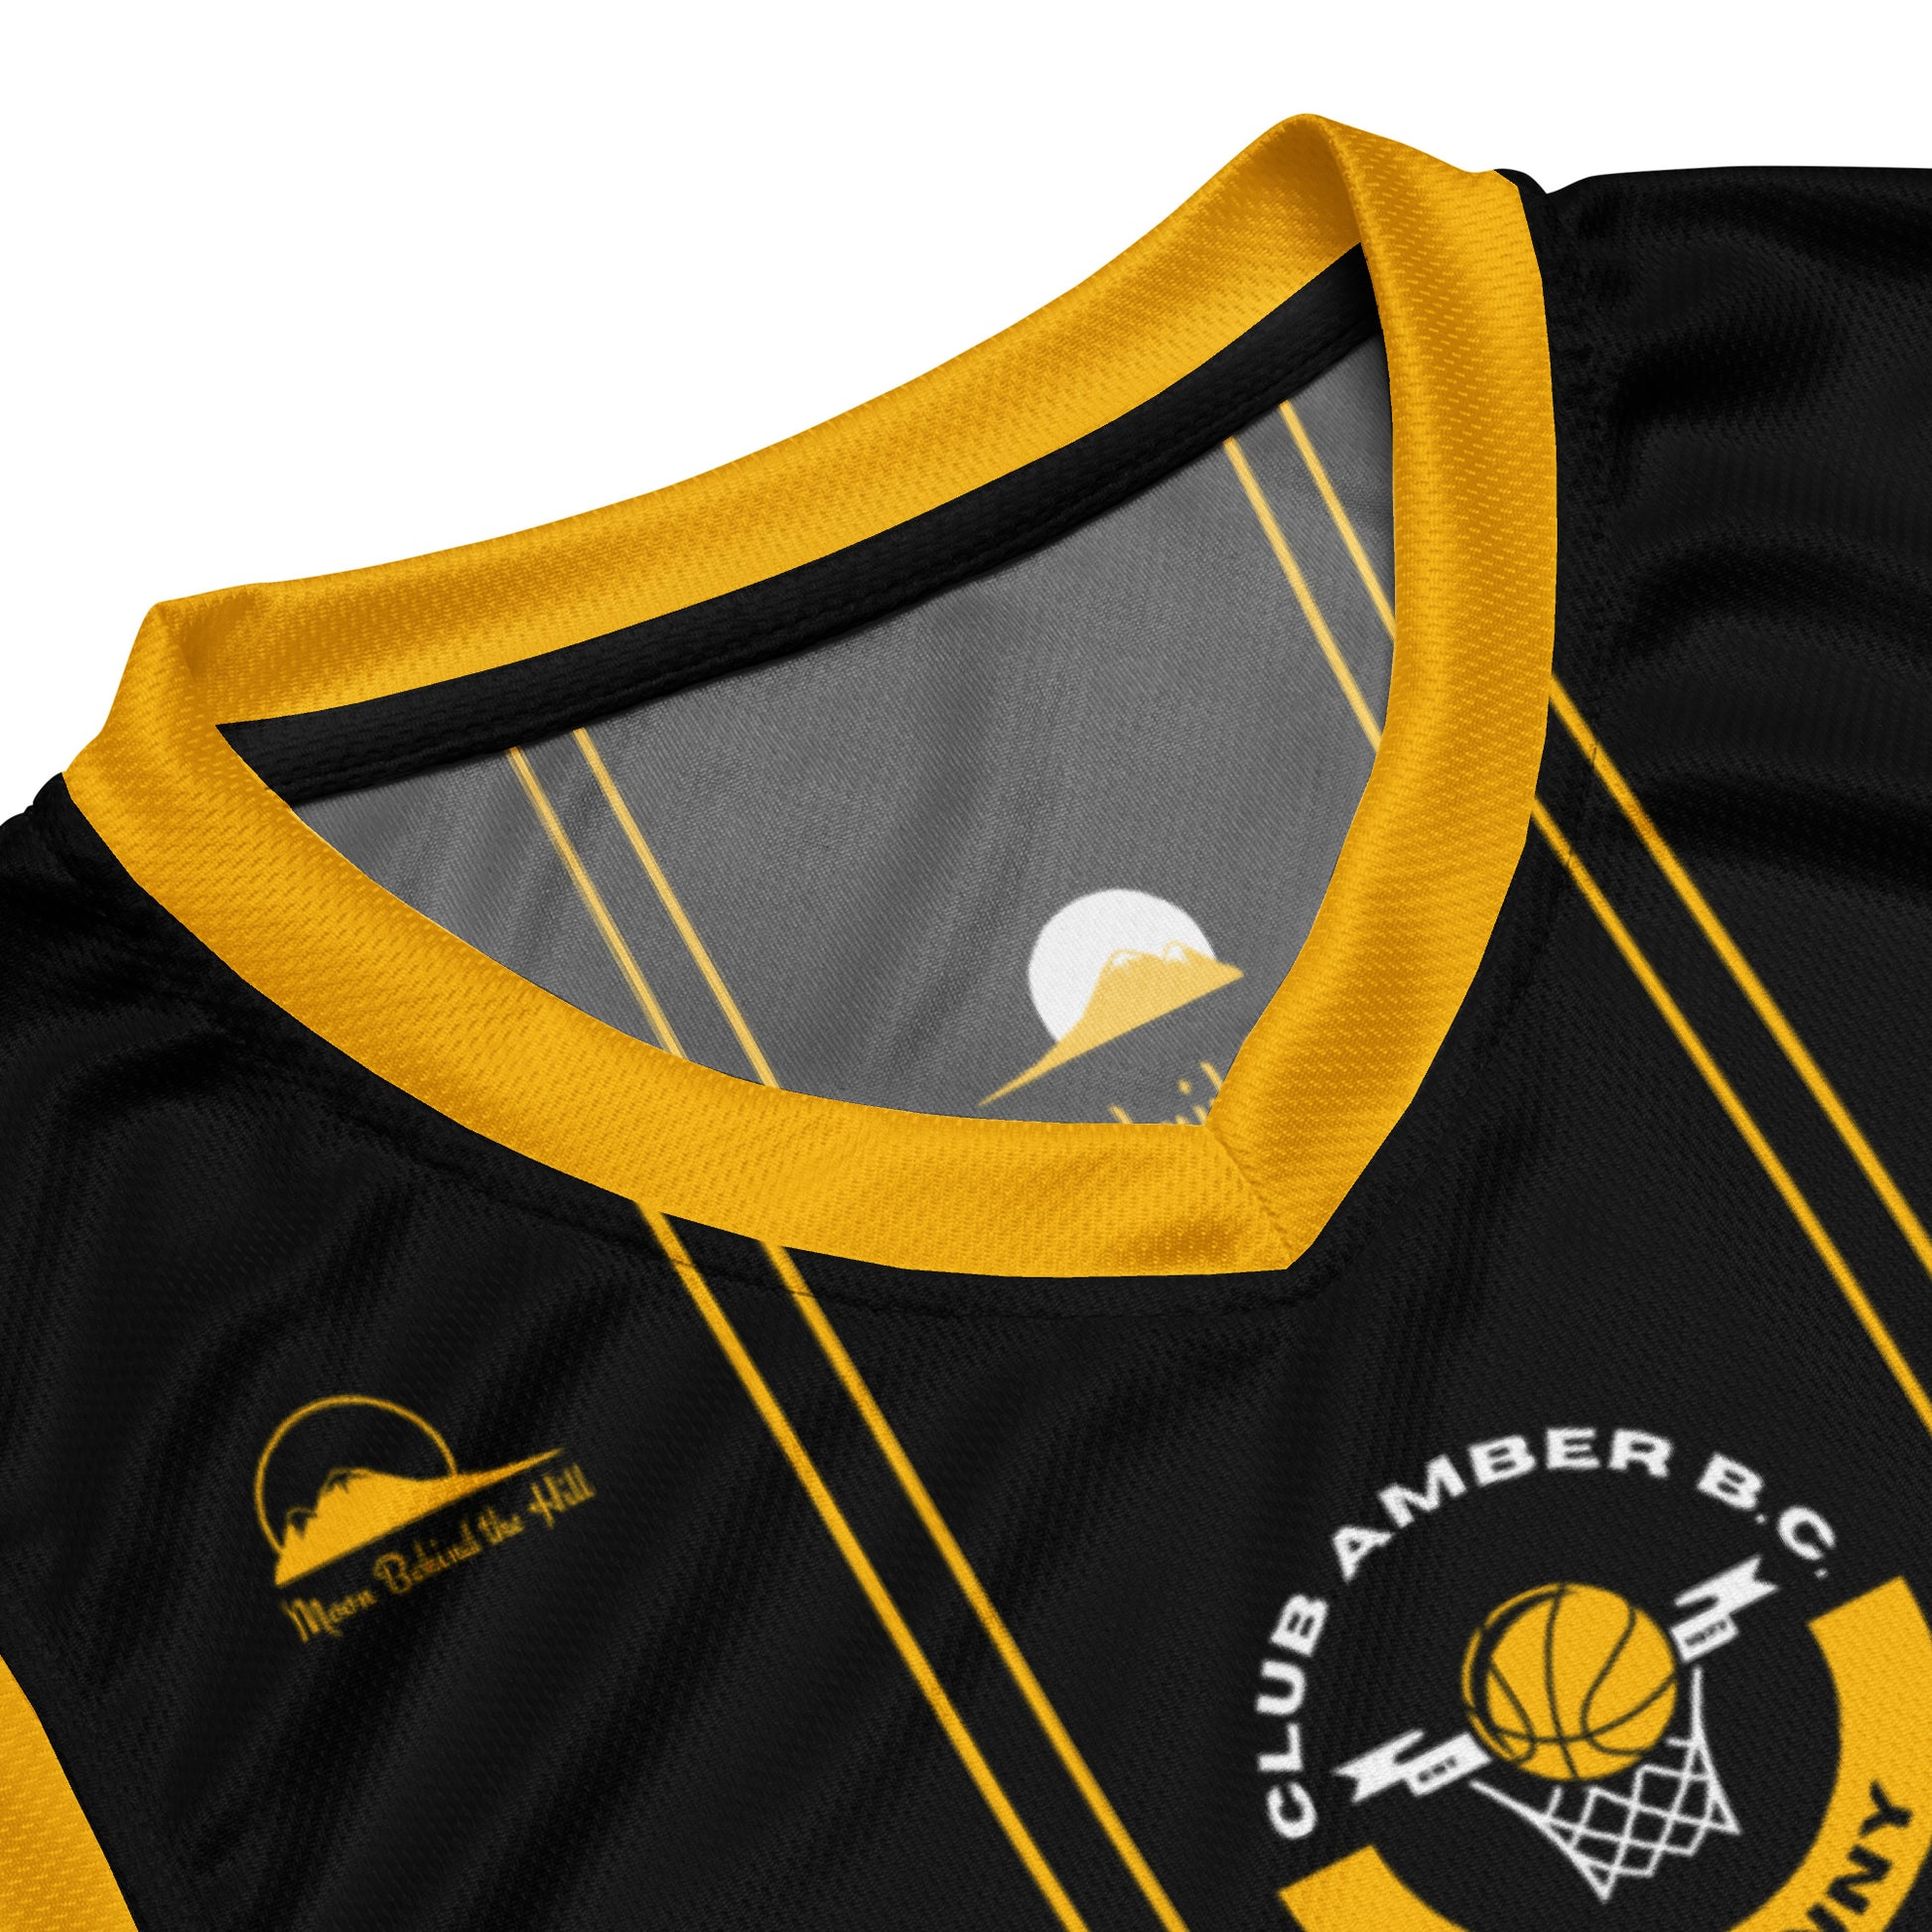 Club Amber #32 Unisex Basketball Jersey 2023 - Designed by Moon Behind The Hill Available to Buy at a Discounted Price on Moon Behind The Hill Online Designer Discount Store